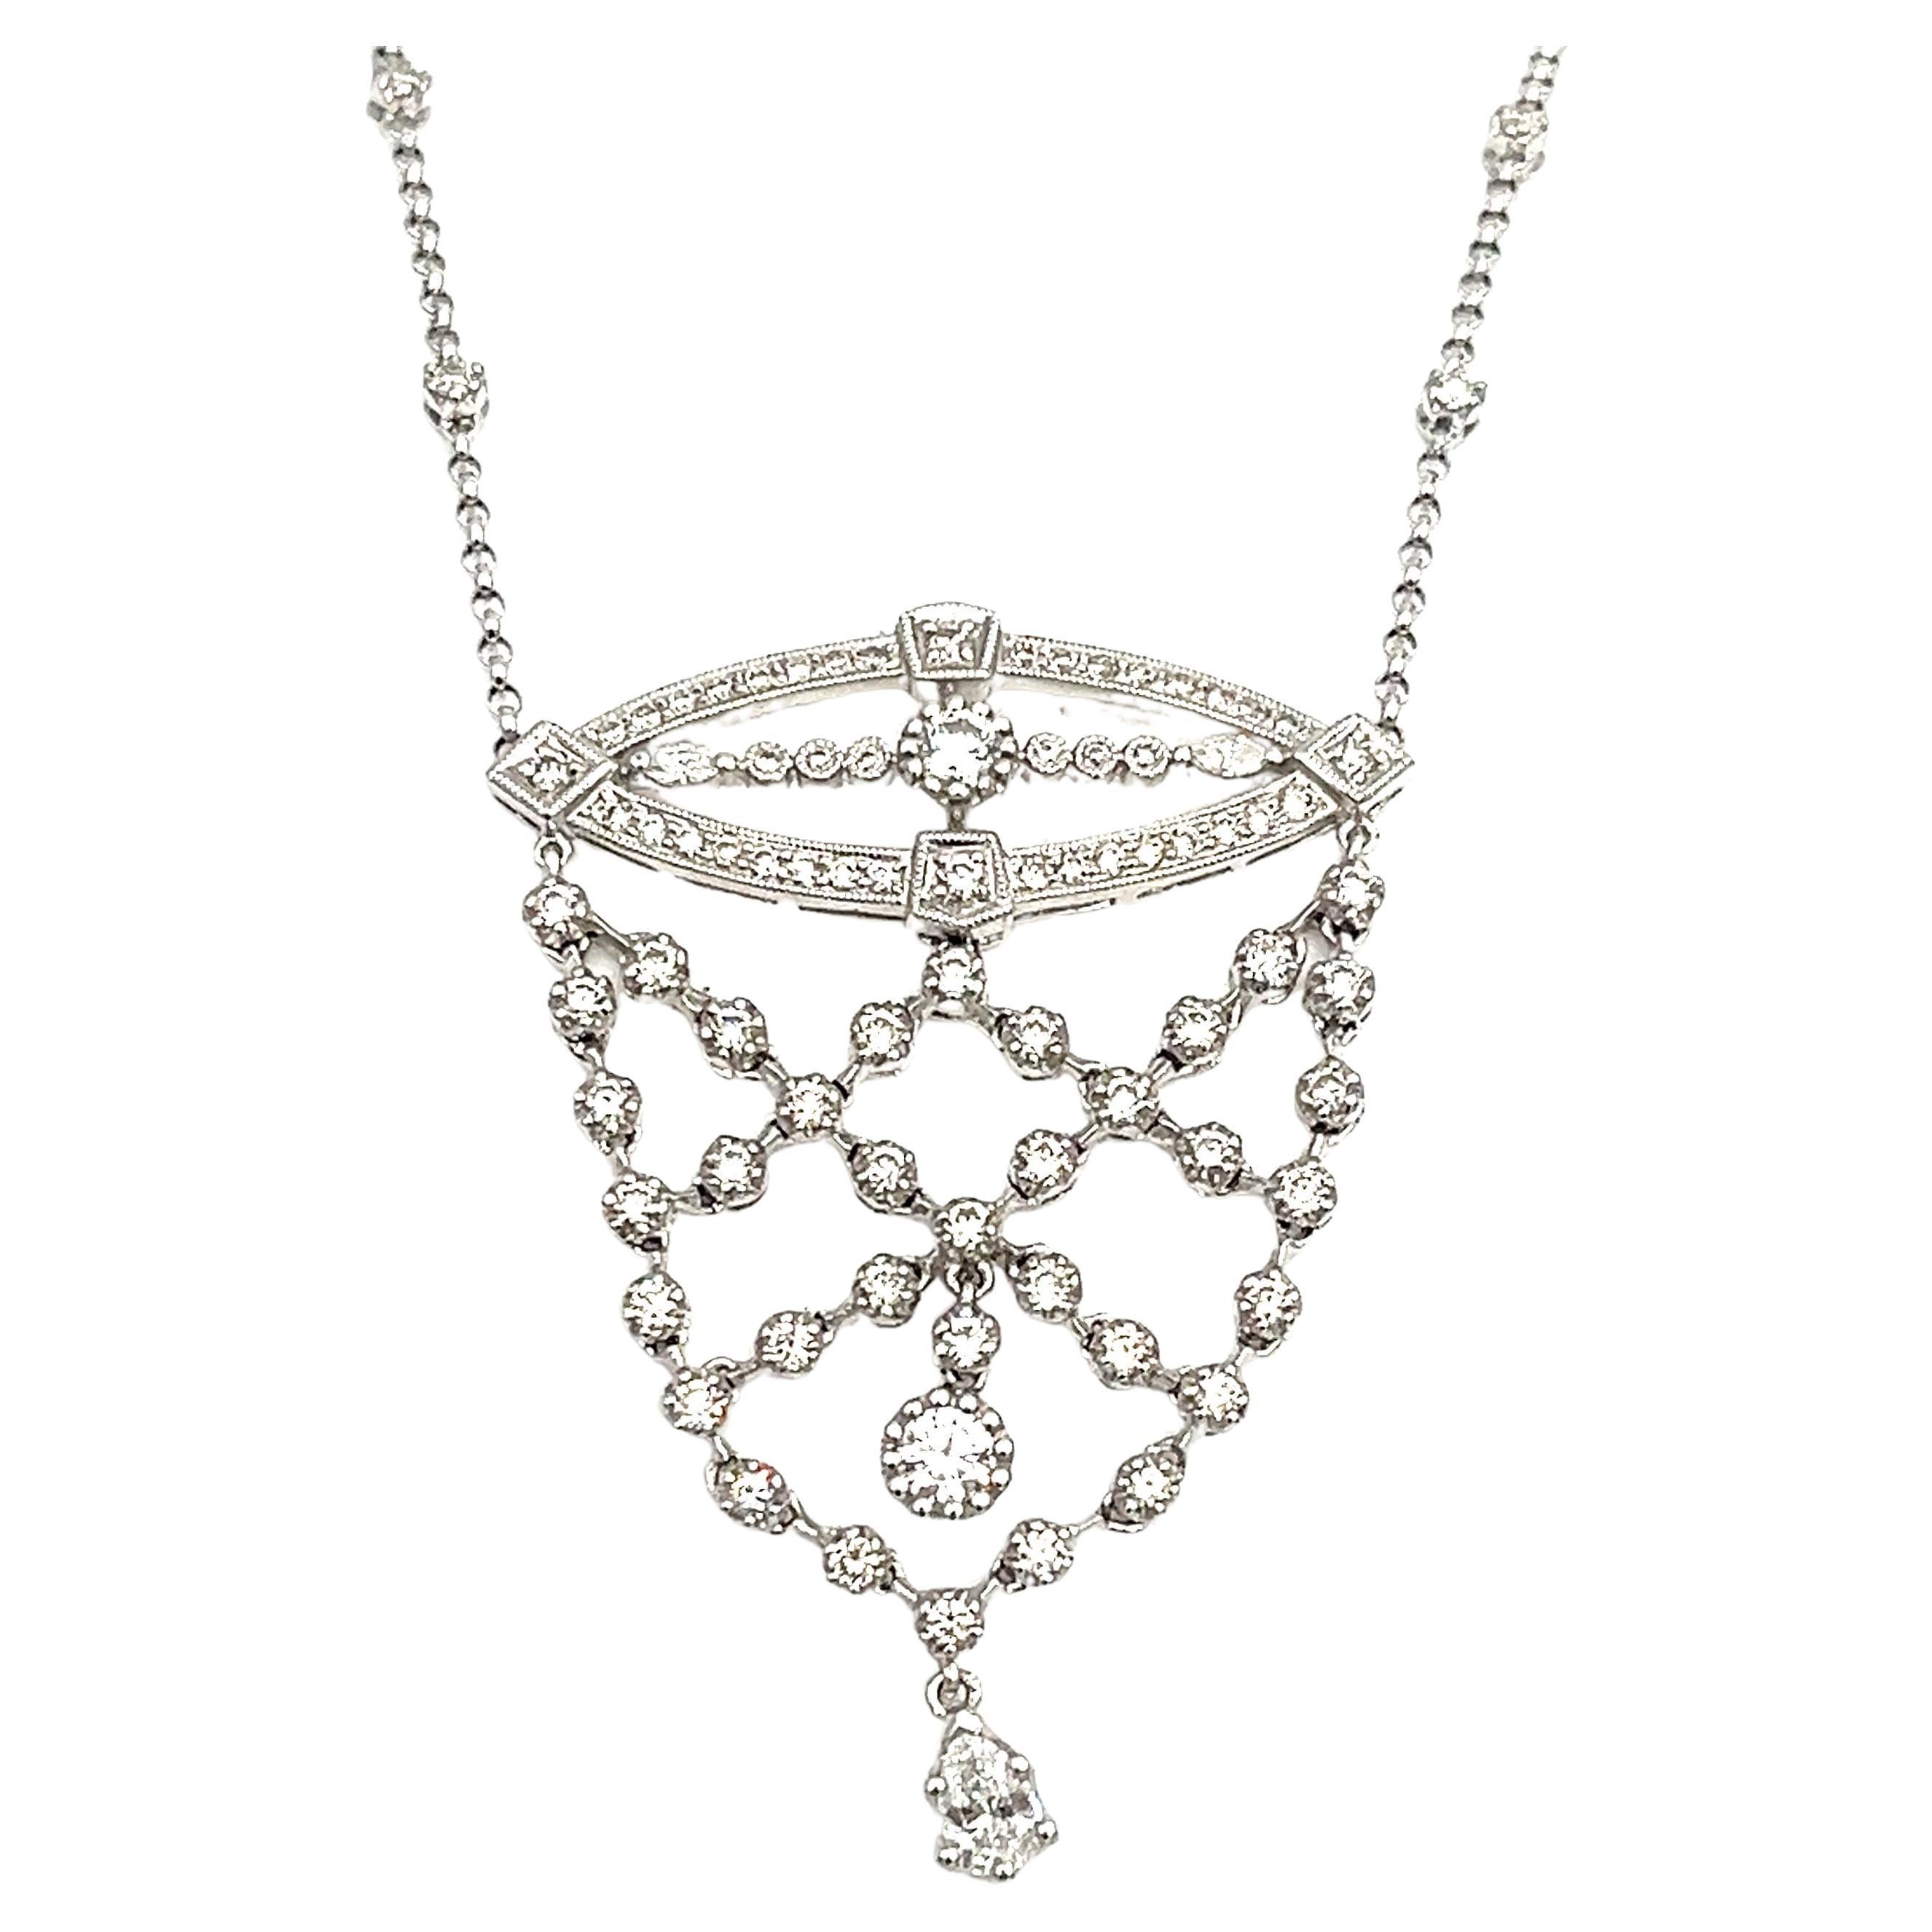 This stunning diamond necklace features 89 diamonds weighing 2.23 ct set in white gold. The diamonds are G in color and SI1 in clarity. Such a unique and fun piece to wear!